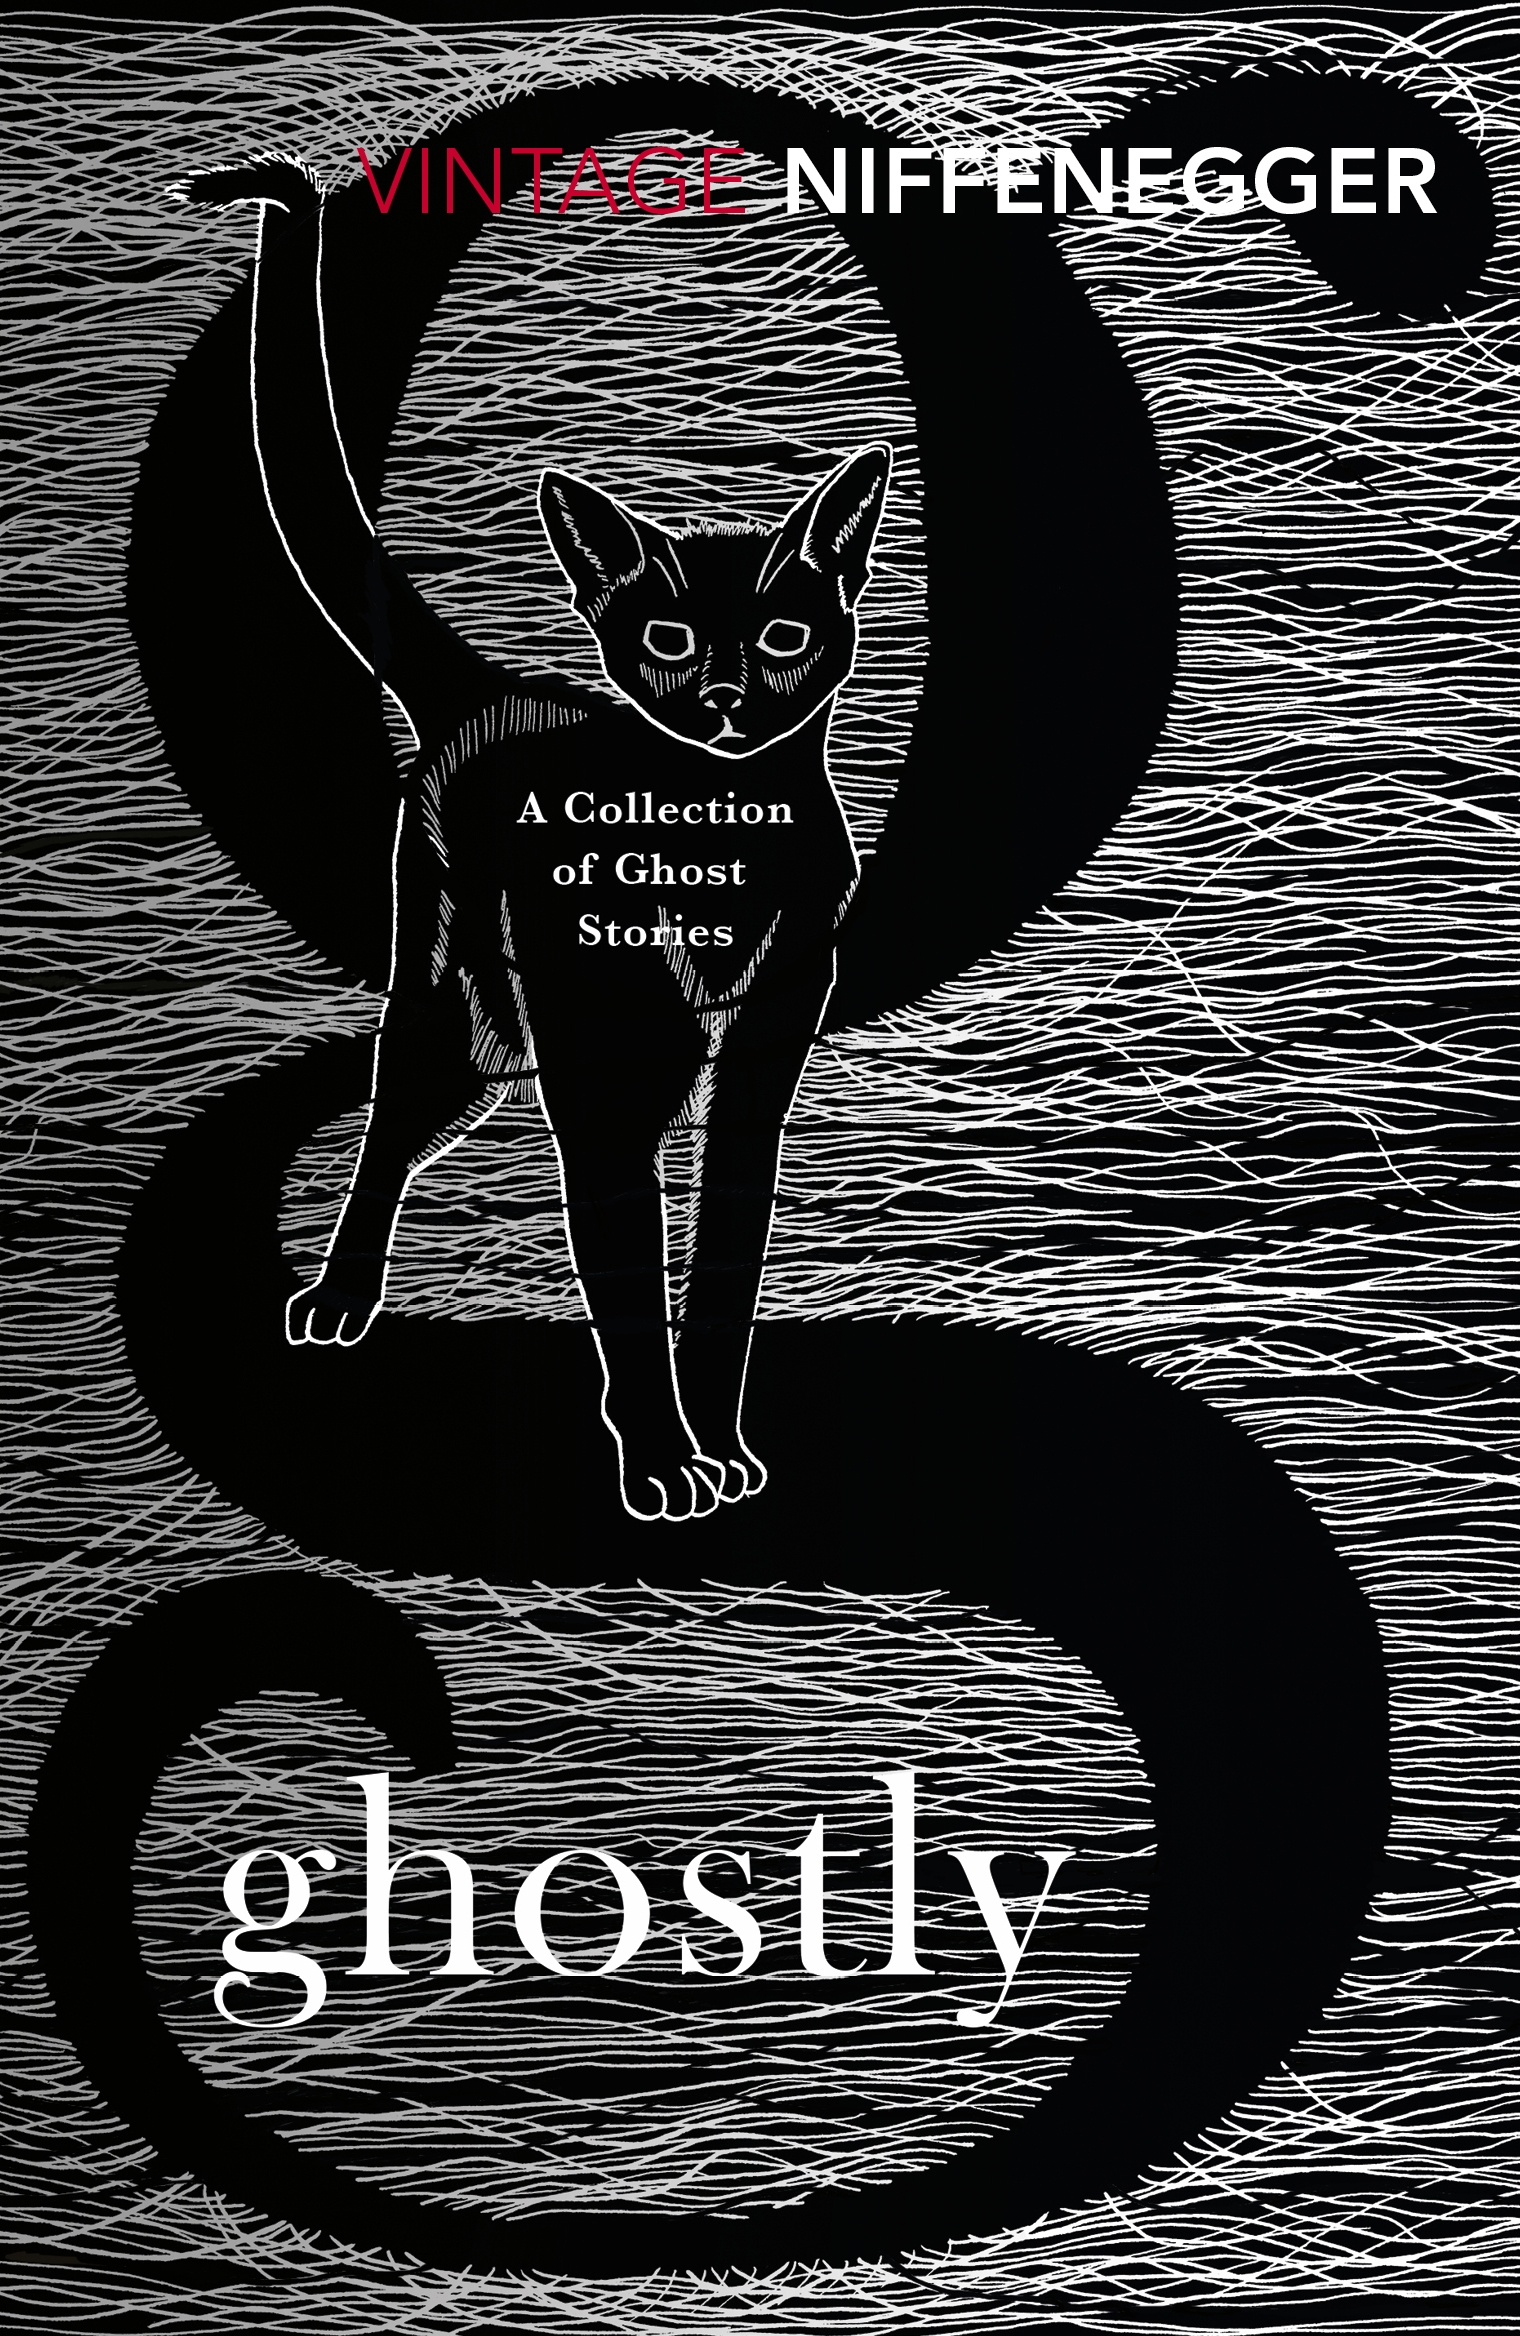 ghostly audrey niffenegger